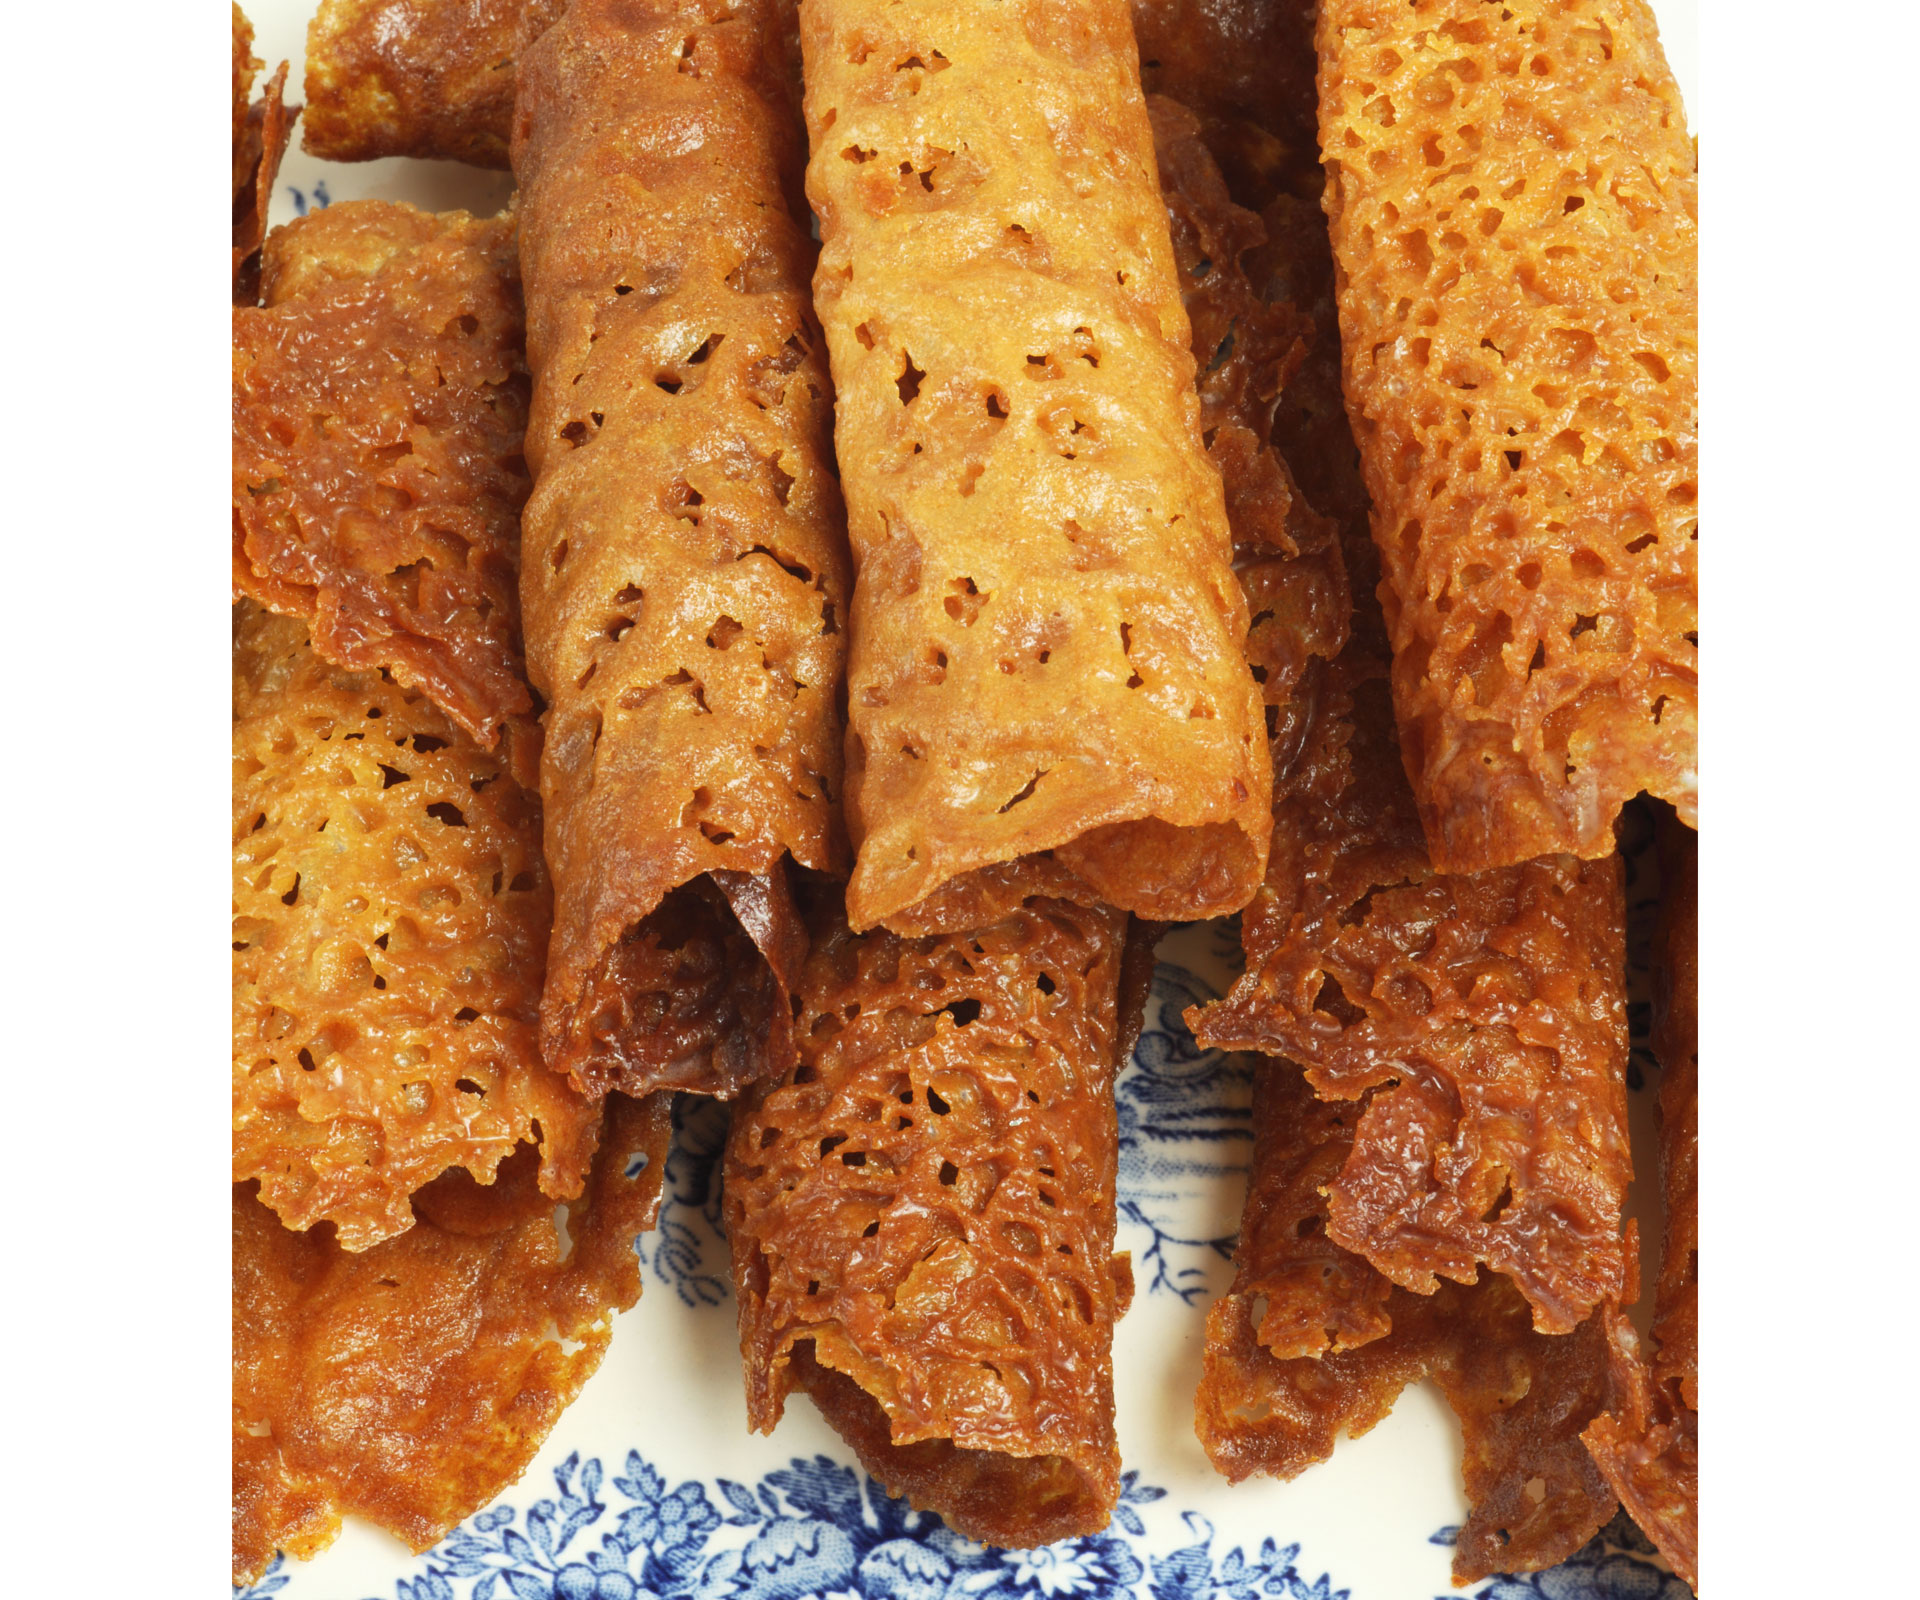 How to: Make your own brandy snaps